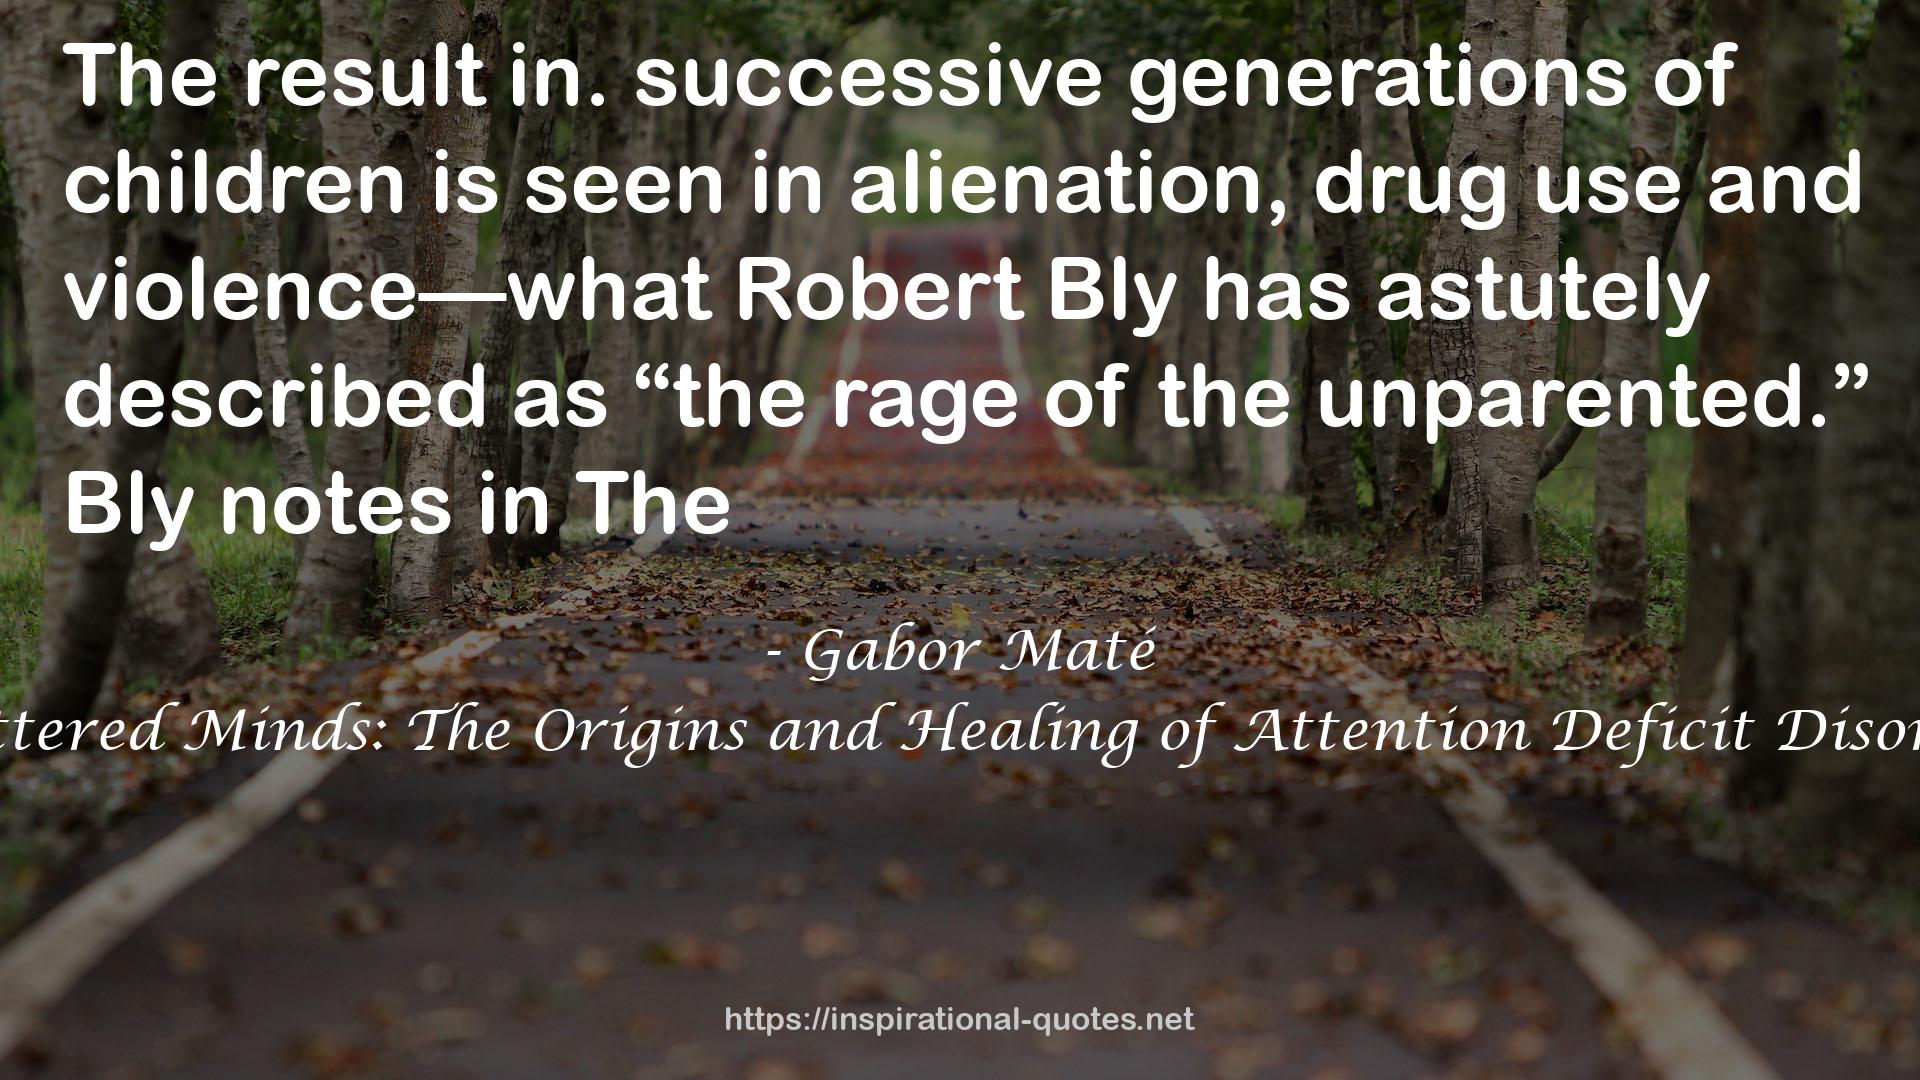 Scattered Minds: The Origins and Healing of Attention Deficit Disorder QUOTES